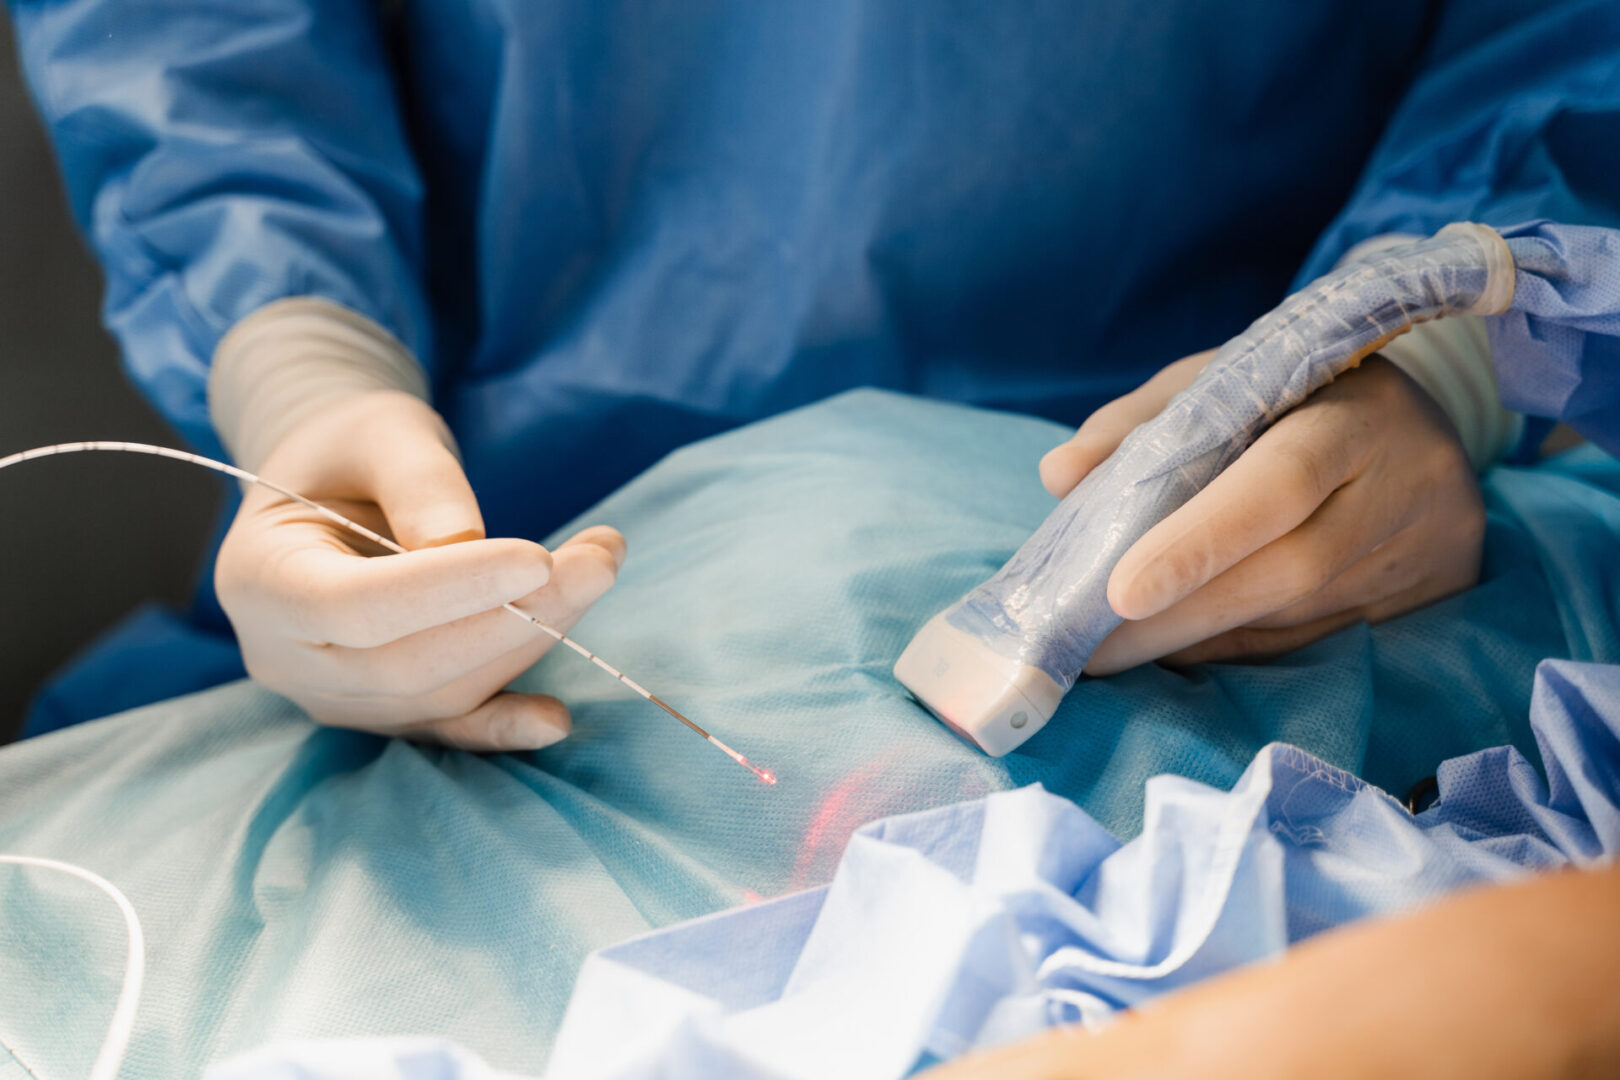 A surgeon is working on an implant.